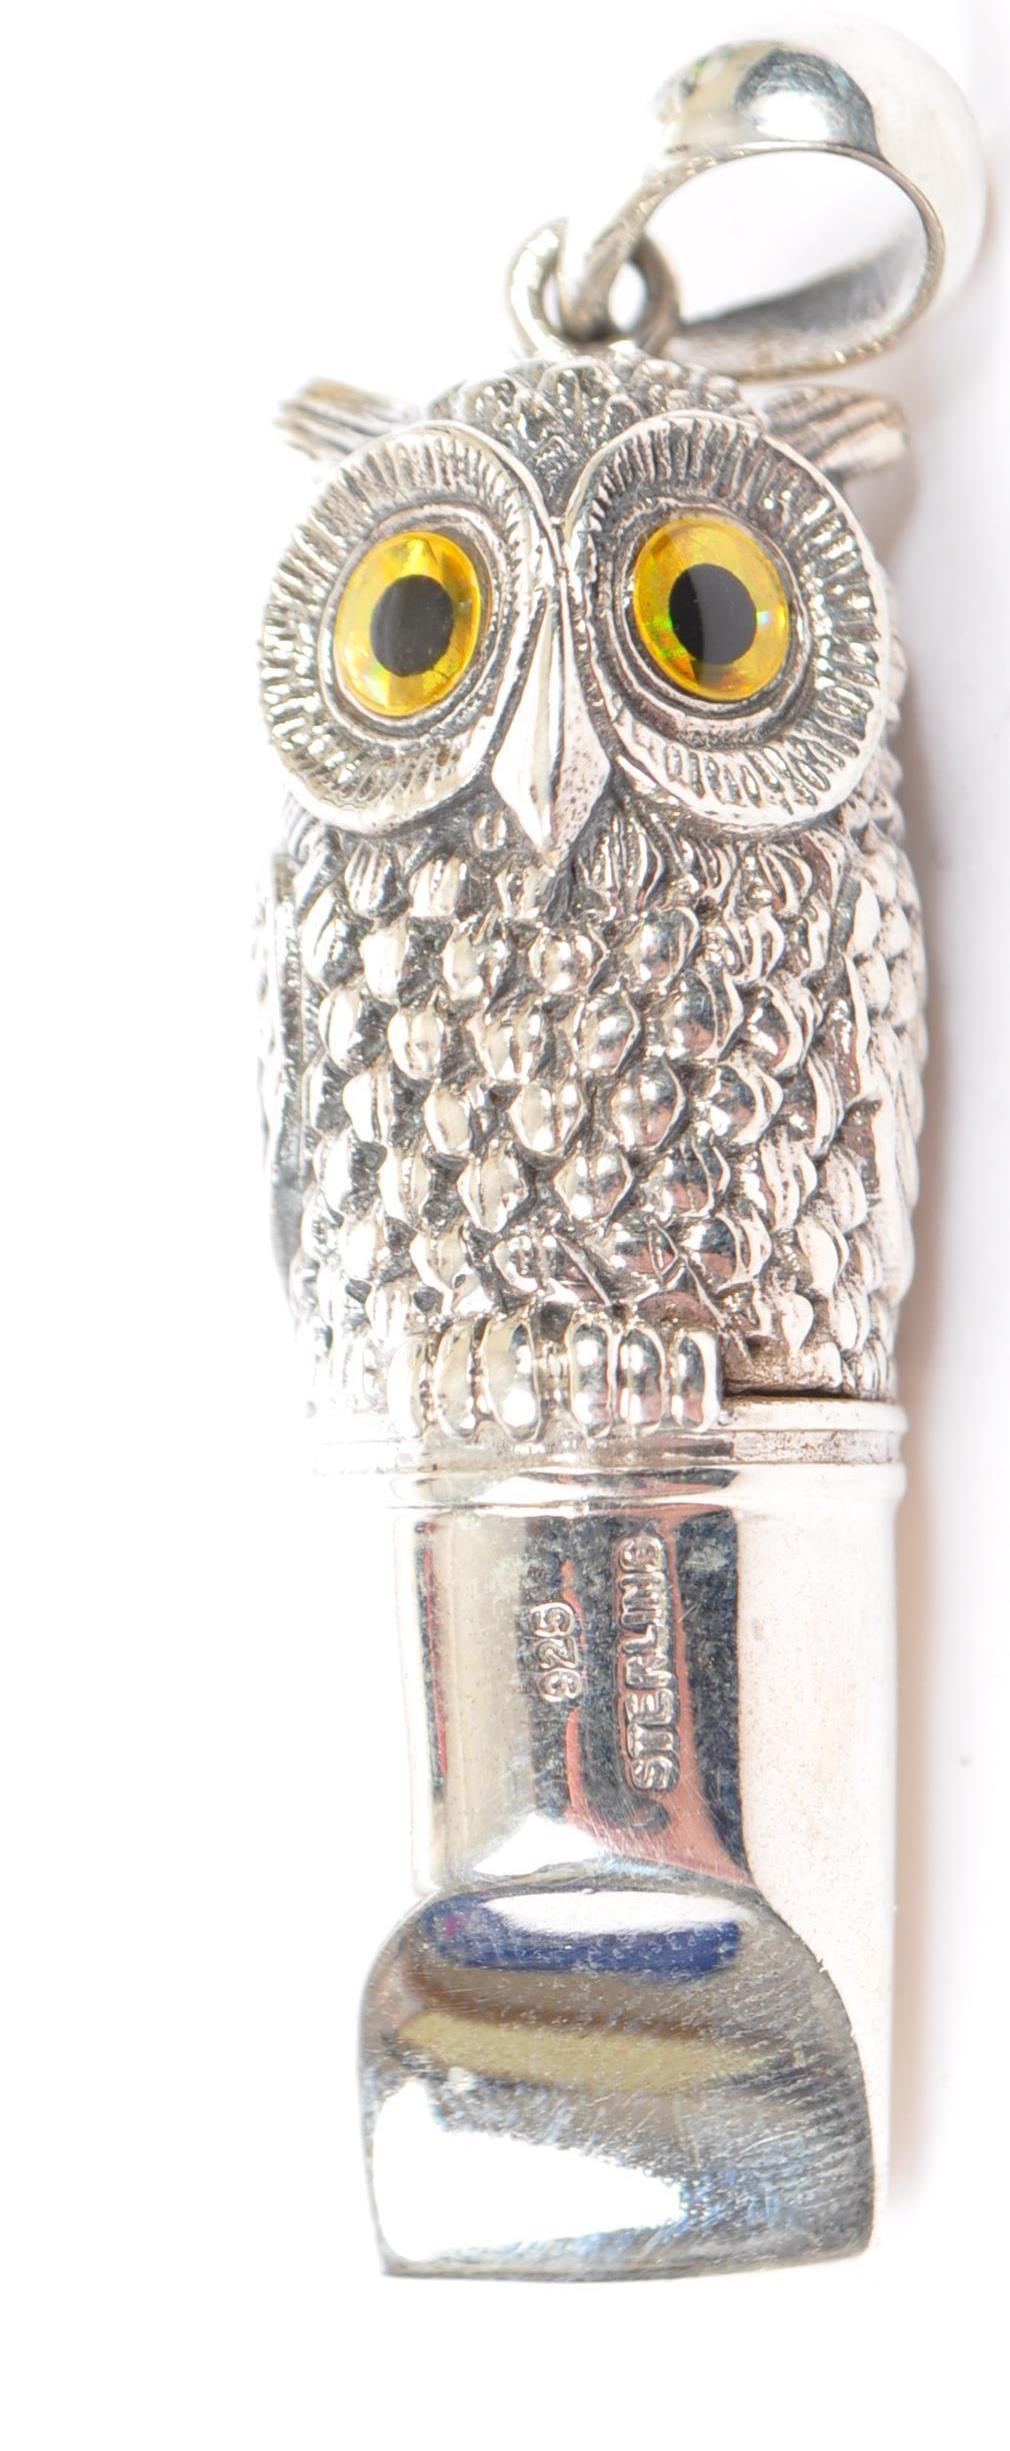 SILVER STAMPED STERLING 925 OWL WHISTLE - Image 4 of 5